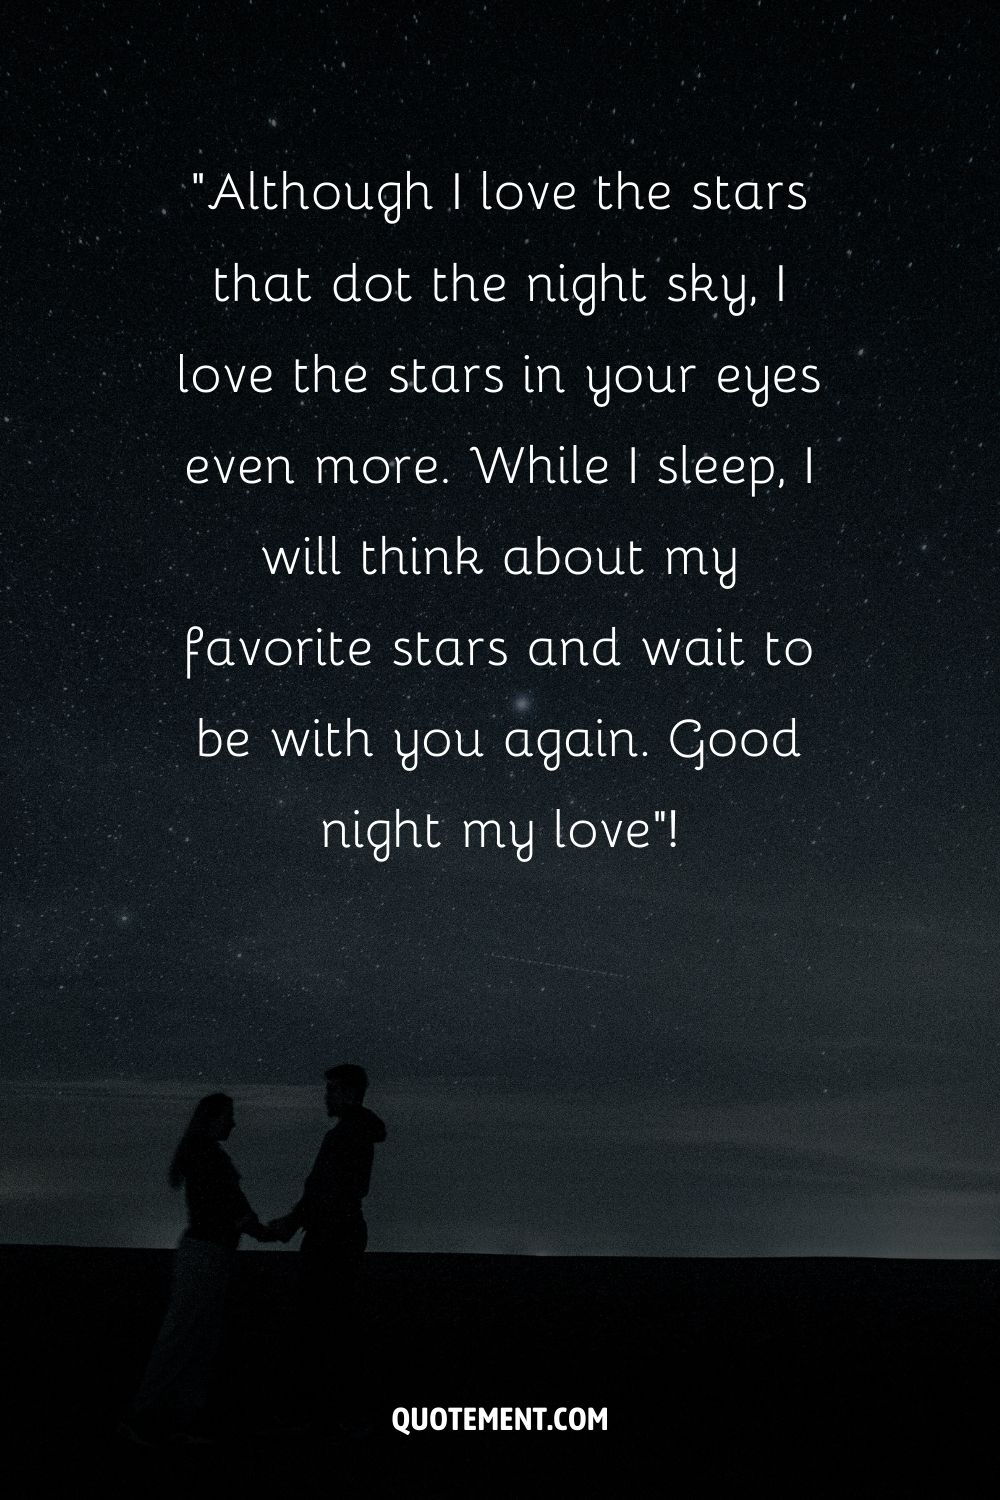 A couple in silhouette against a cosmic night sky with stars